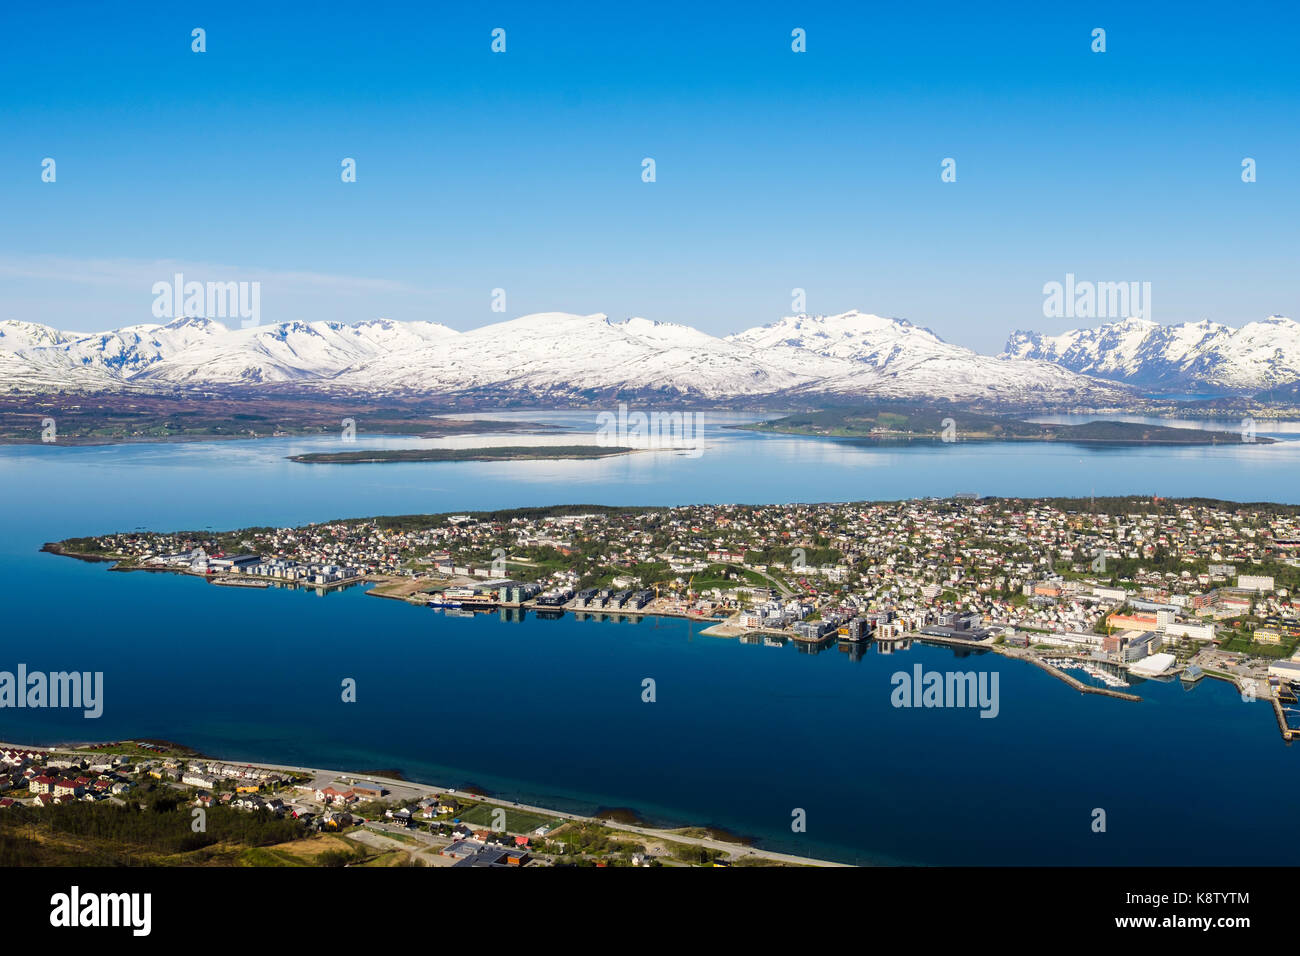 High view above old city on Tromsoya island with snow-capped mountains seen from Mount Storsteinen. Tromso, Troms county, Norway, Scandinavia Stock Photo